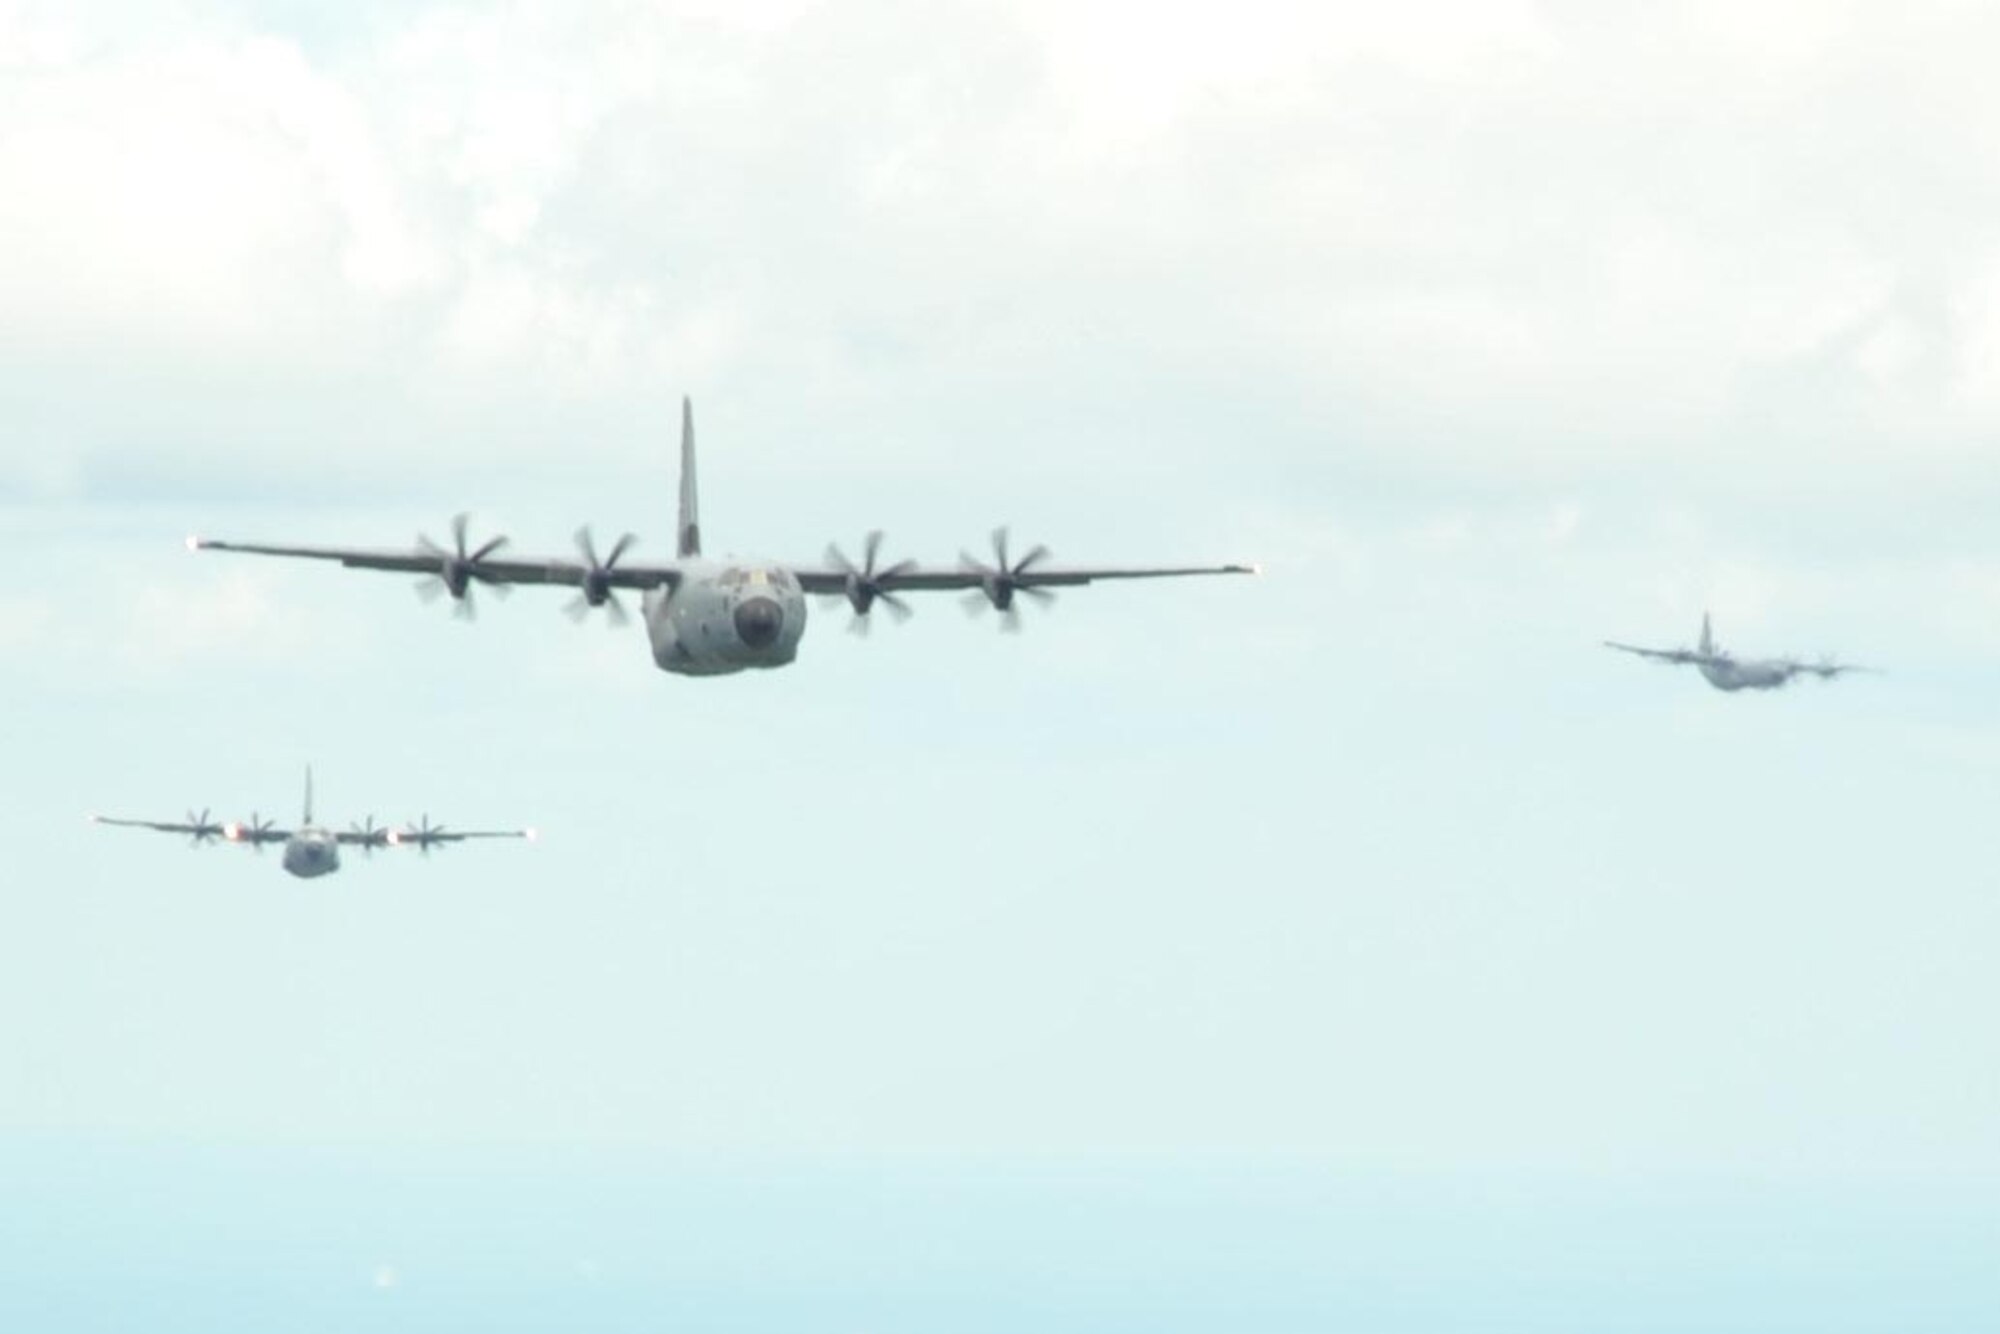 815th Airlift Squadron C-130J aircraft fly over the Mississippi Gulfcoast during a four-aircraft training mission Sept. 11, 2016. The aircraft took off from Keesler Air Force Base, Mississippi, and airdropped simulated cargo and heavy equipment over Stennis International Airport, Mississippi. (U.S. Air Force photo/Tech. Sgt. Ryan Labadens)